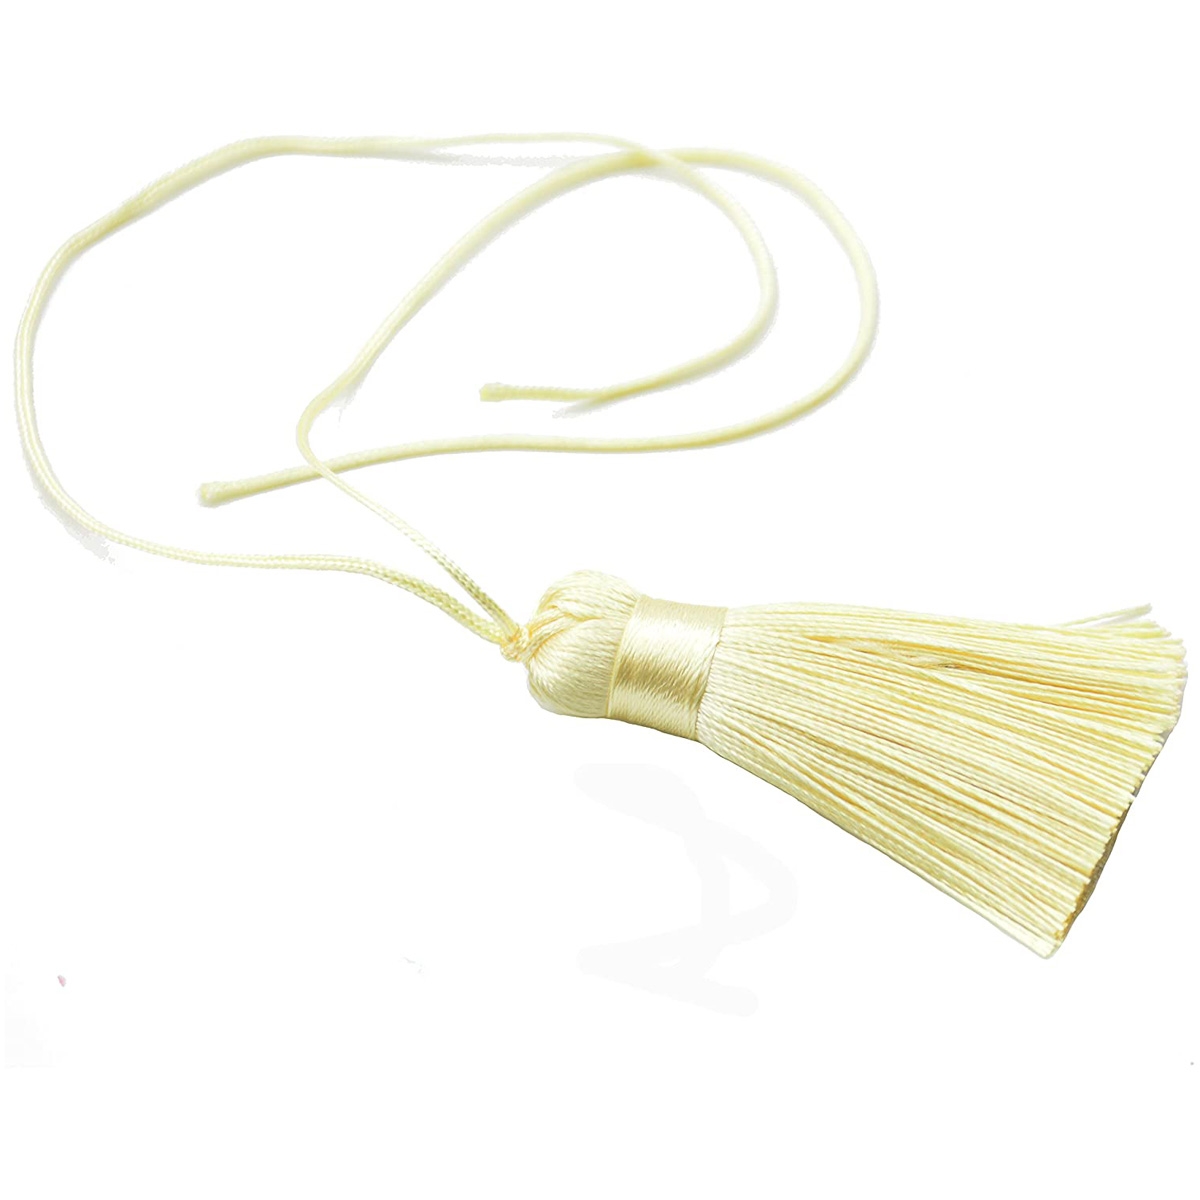 Tiny Chunky Tassels Soft Elegant Handmade Silky Floss Tassels with 7.8 Inch Cord Loop for Woman 